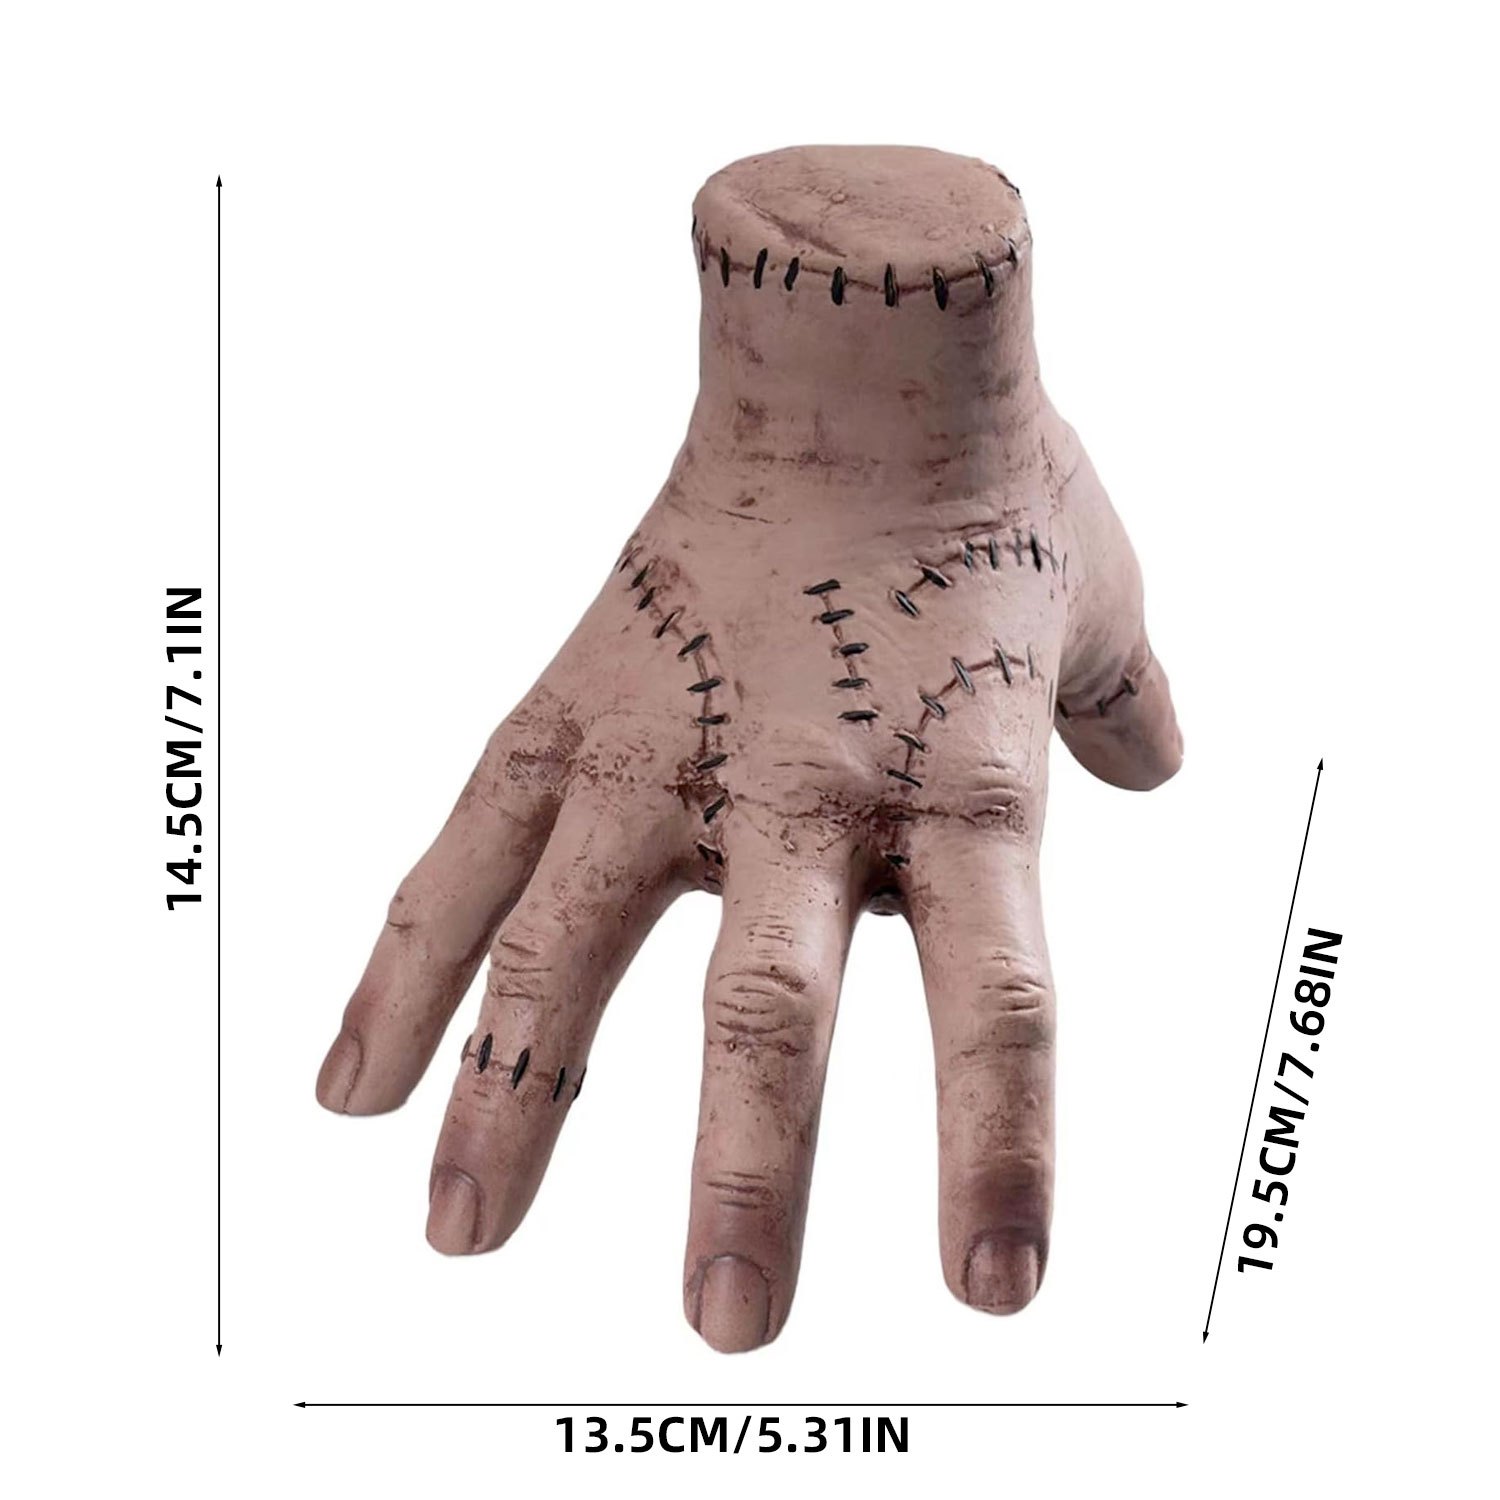 Wednesday Addams Family Thing Hand, Cosplay Hand by Addams Family, Fake Hand  Toys Scary Props Halloween Decorations Prop Movie 